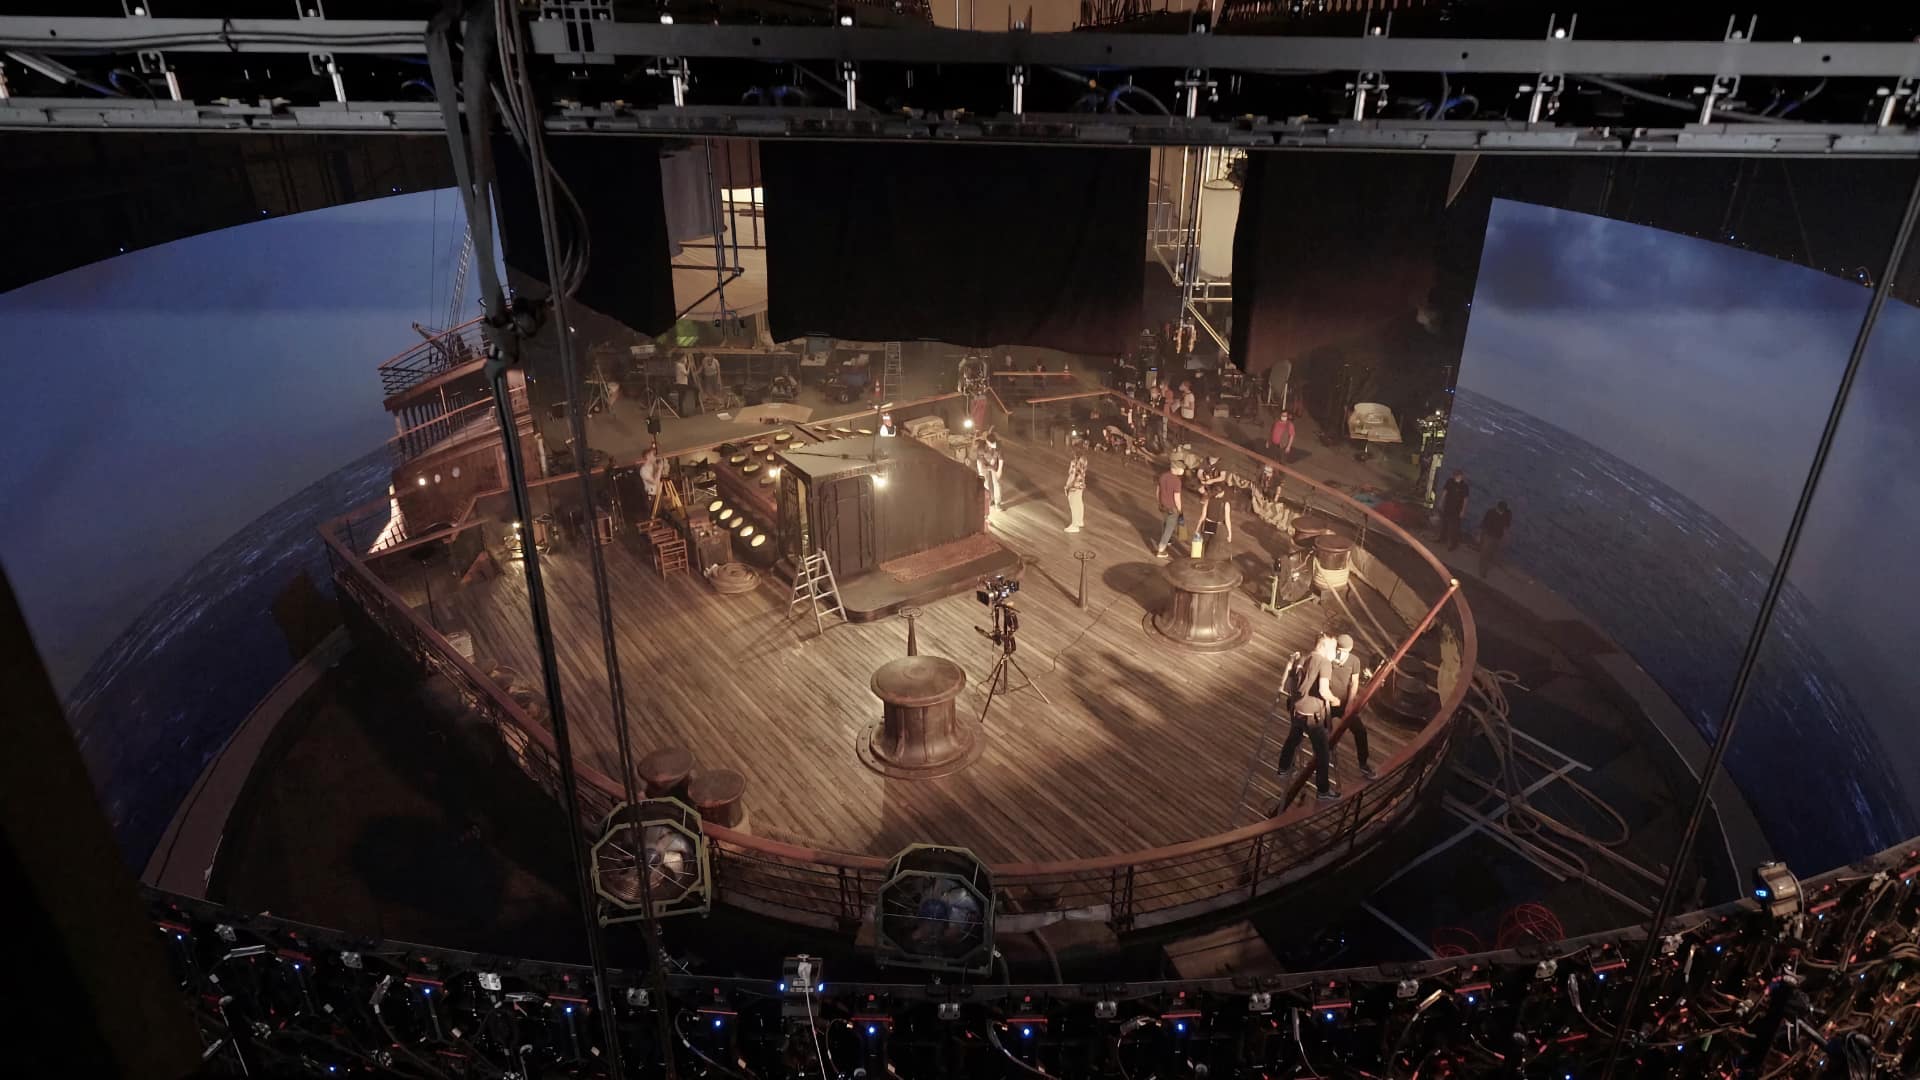 Megapixel VR helps power sets such as this for 1899. Photo Credit: Alex Forge / NETFLIX